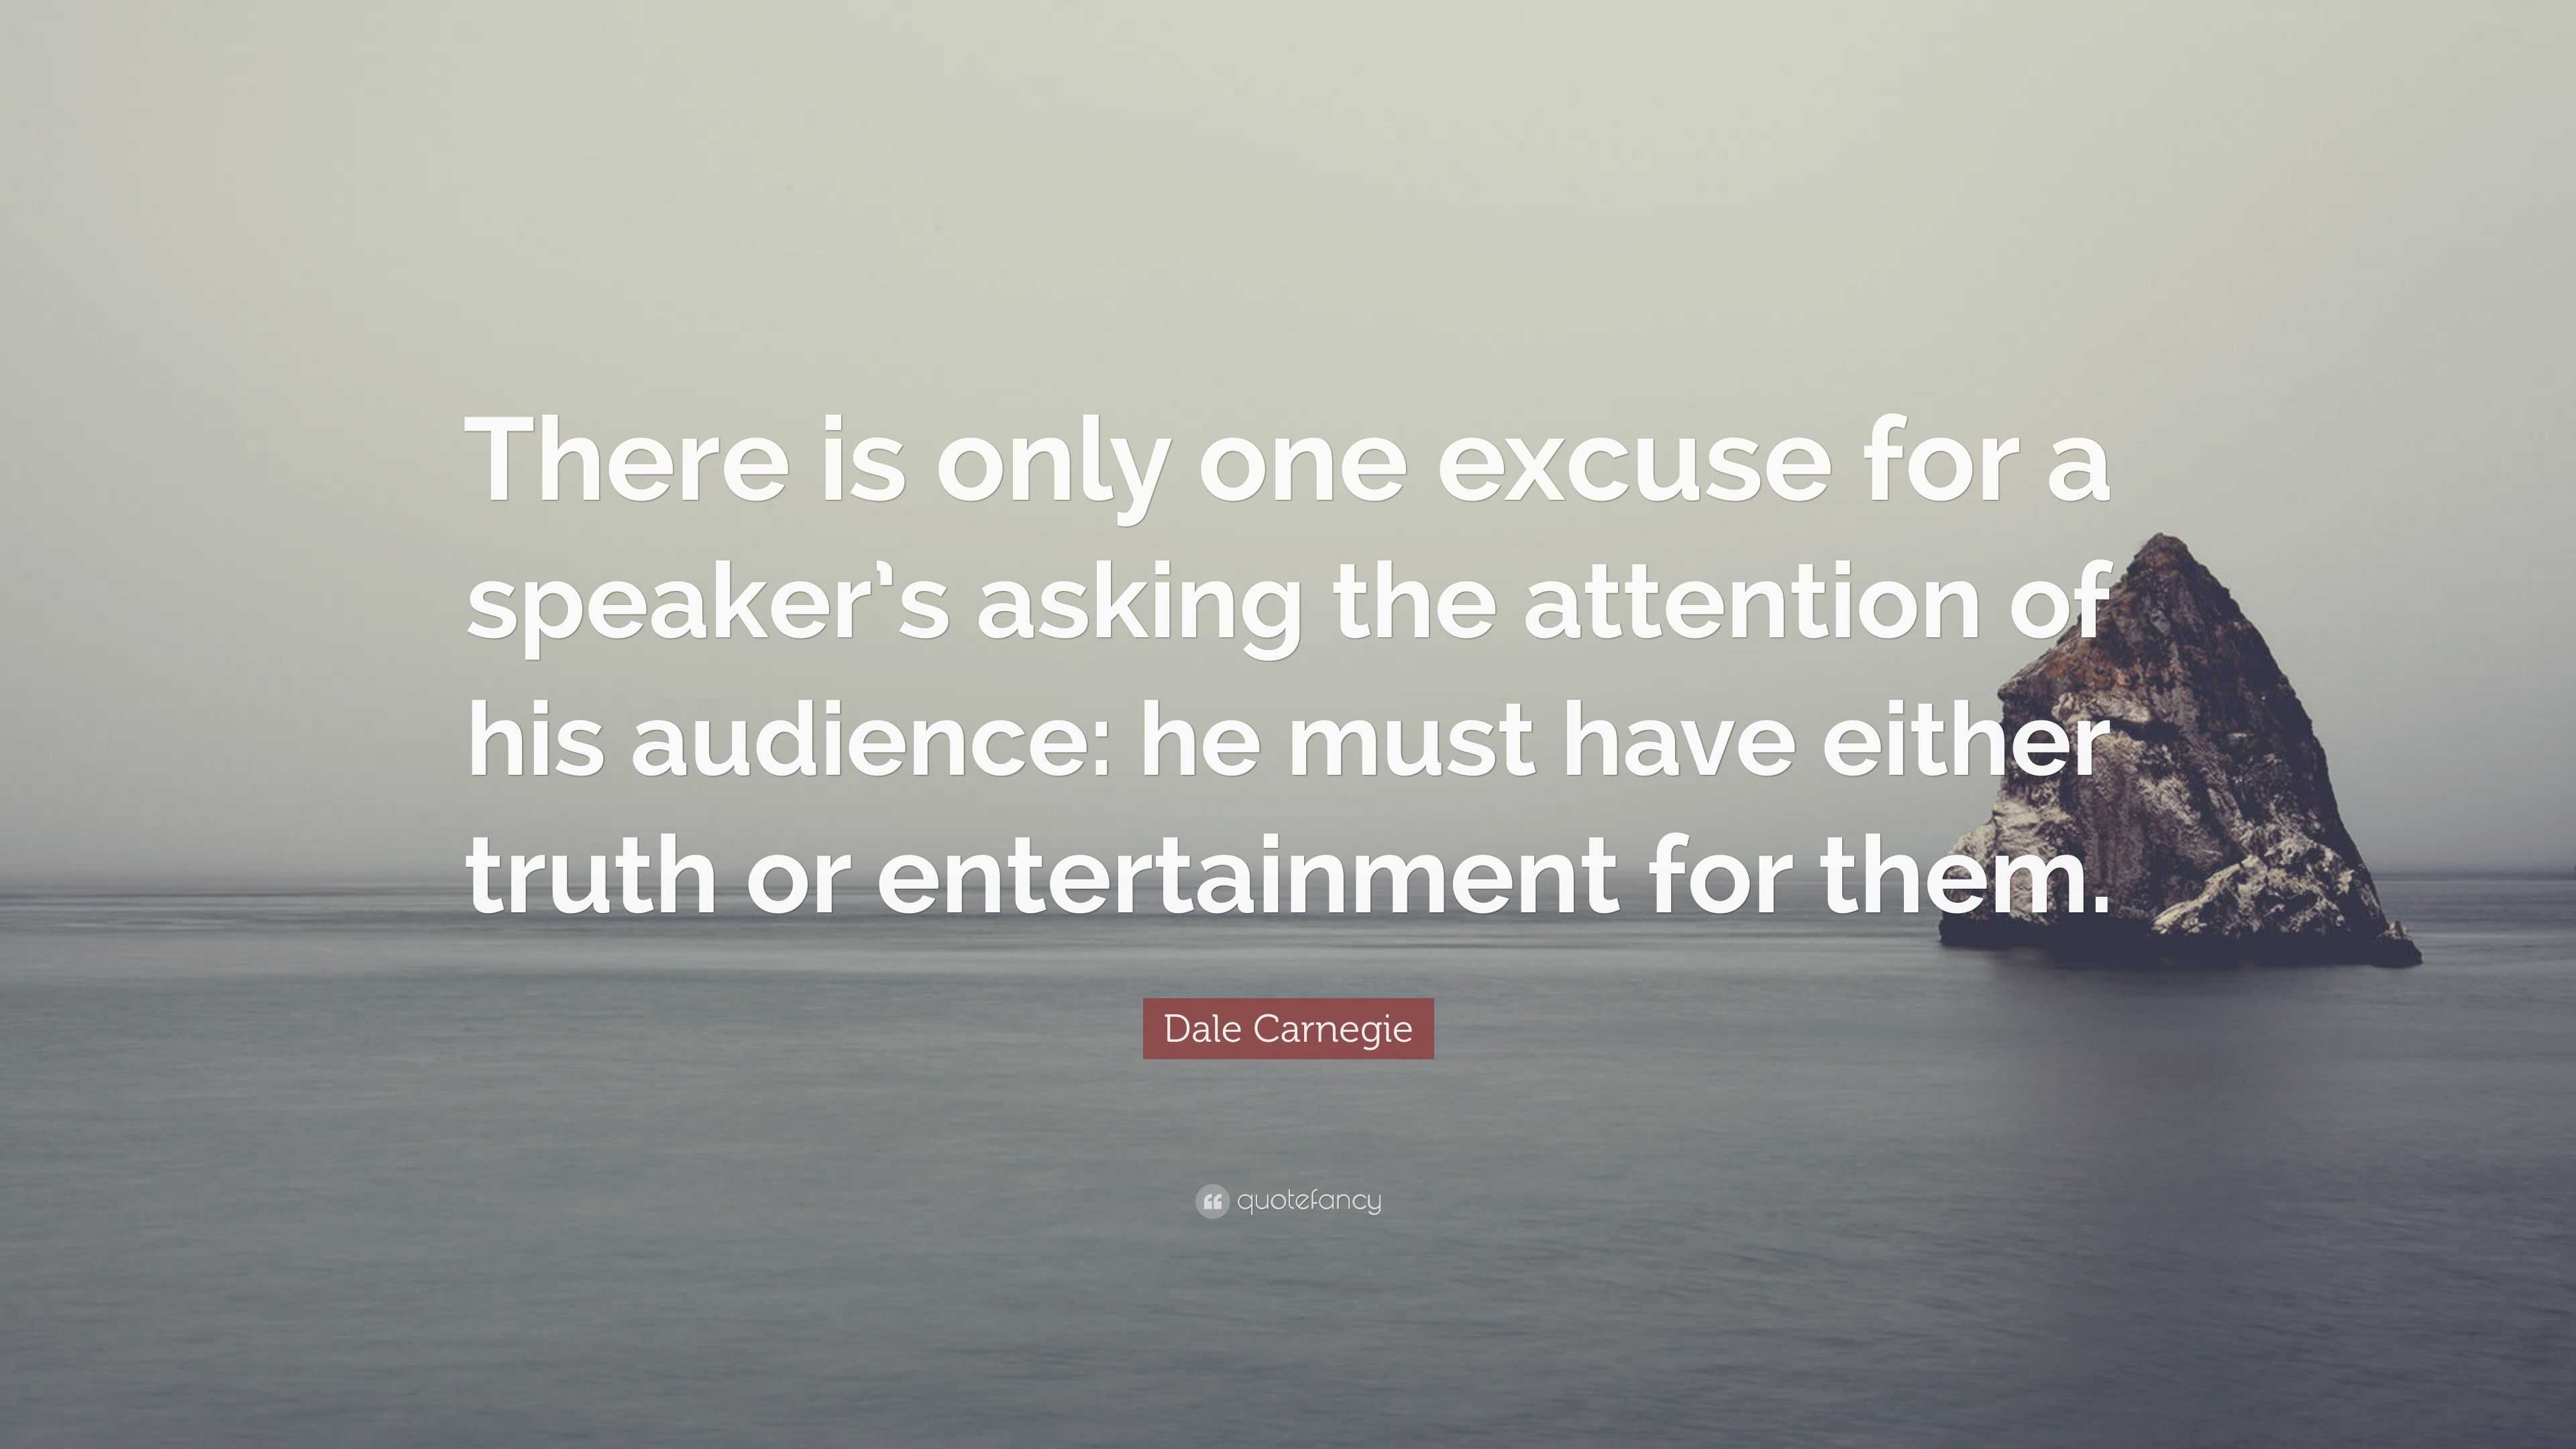 Dale Carnegie Quote: “There is only one excuse for a speaker’s asking ...